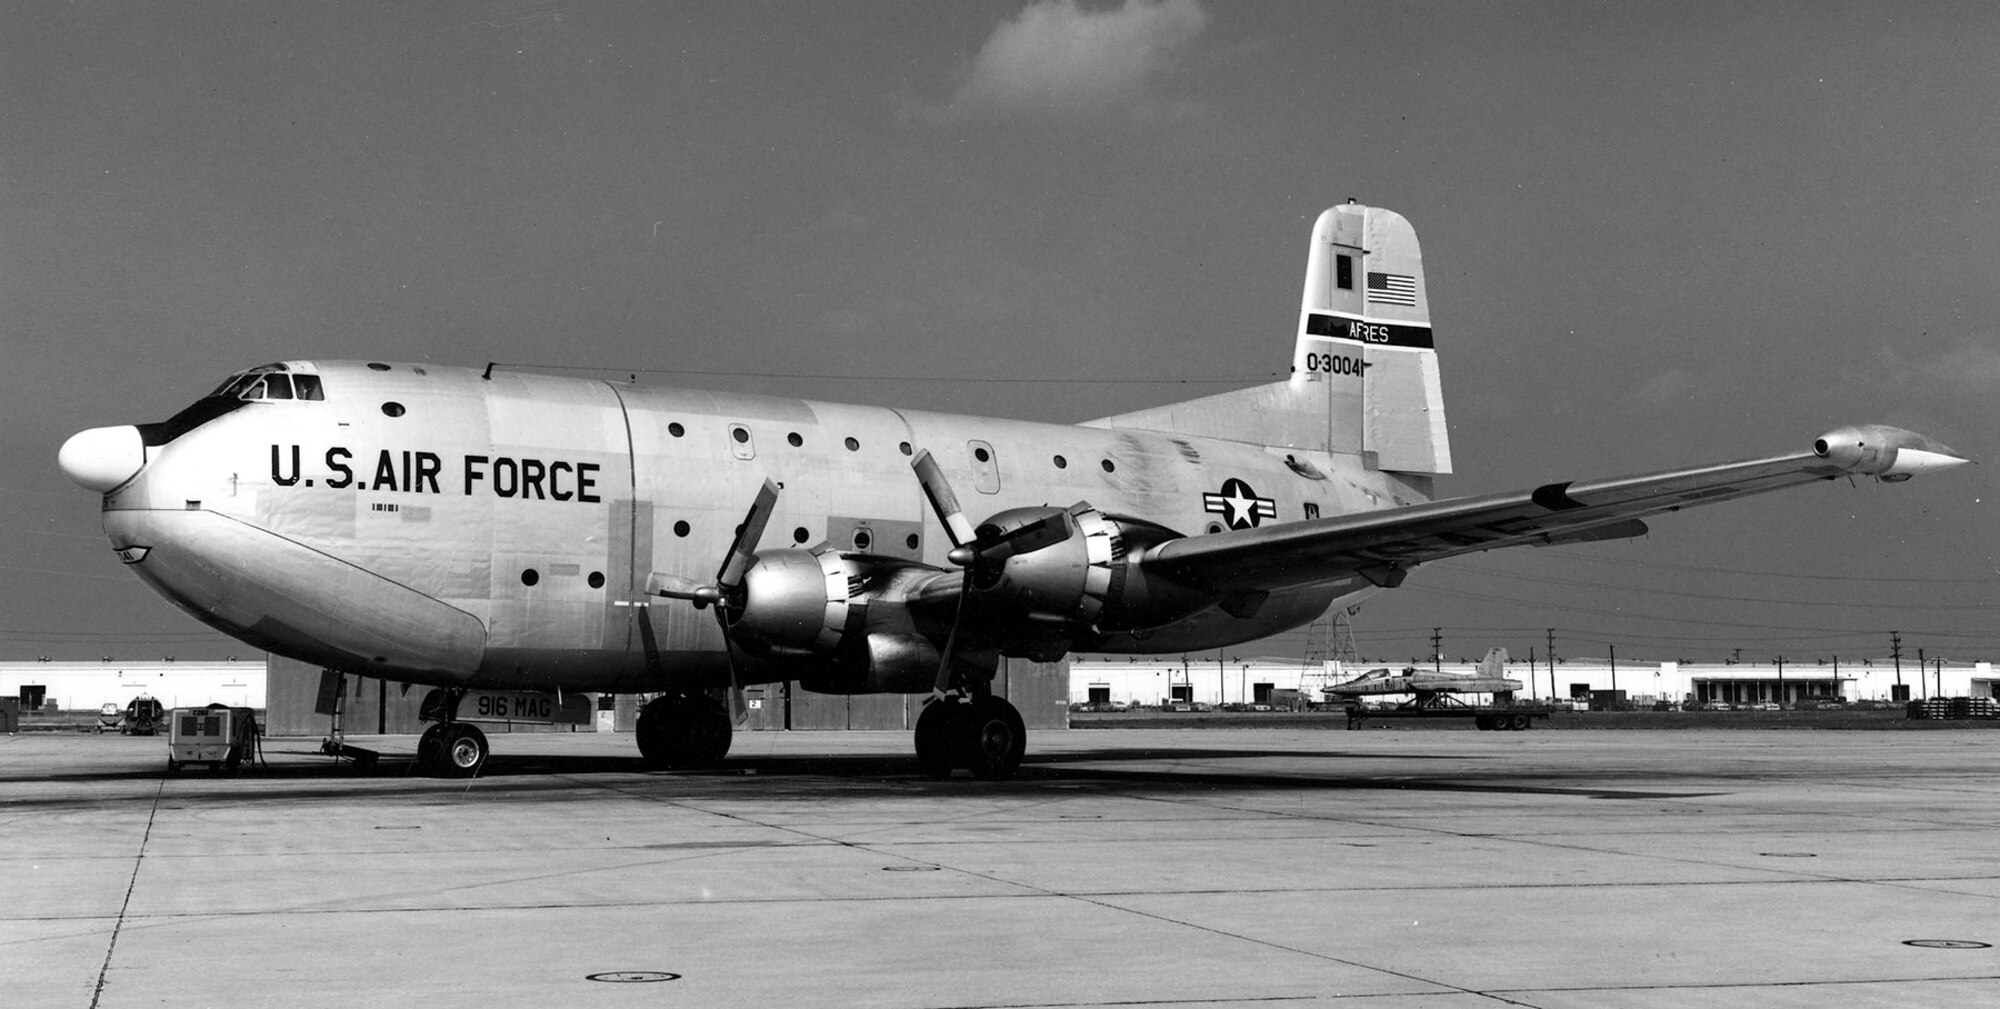 A C-124 Globemaster II like the one depicted in this photo, was operated and maintained by the 937th Troop Carrier Group (later the 937th Air Transport Group and then 937th Military Airlift Group) at Tinker Air Force Base, 1963-1972.  The 937th TCG, activated here on January 17, 1963, due to a reorganization by Continental Air Command to better facilitate the mobilization of Reserve forces when needed. (U.S. Air Force Photo)